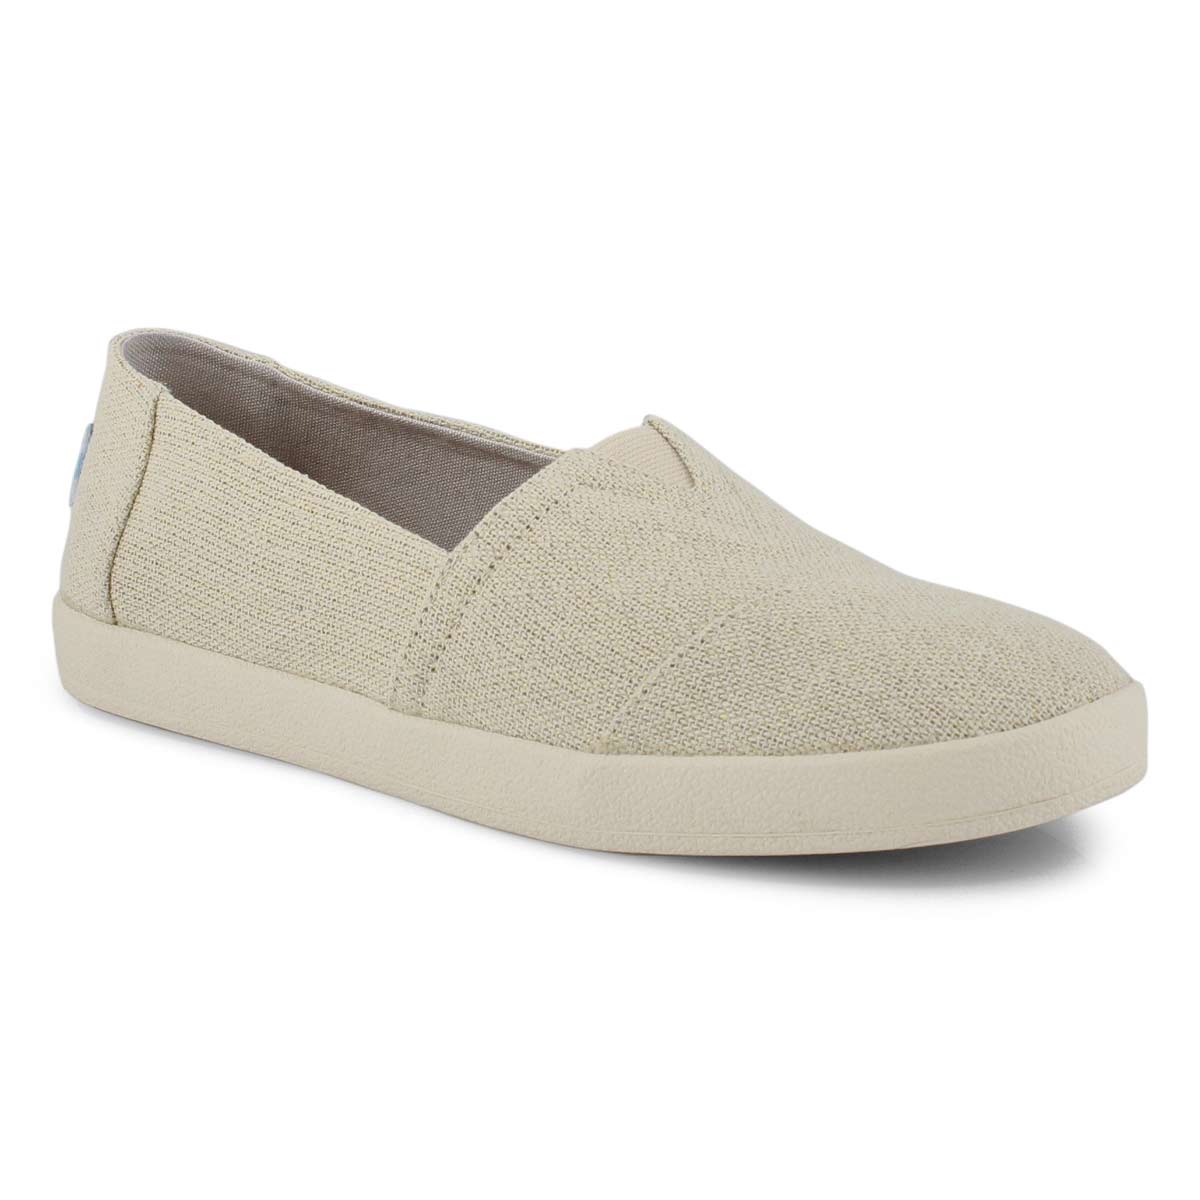 TOMS Women's Avalon Canvas Loafer - Bliss Blu | SoftMoc.com